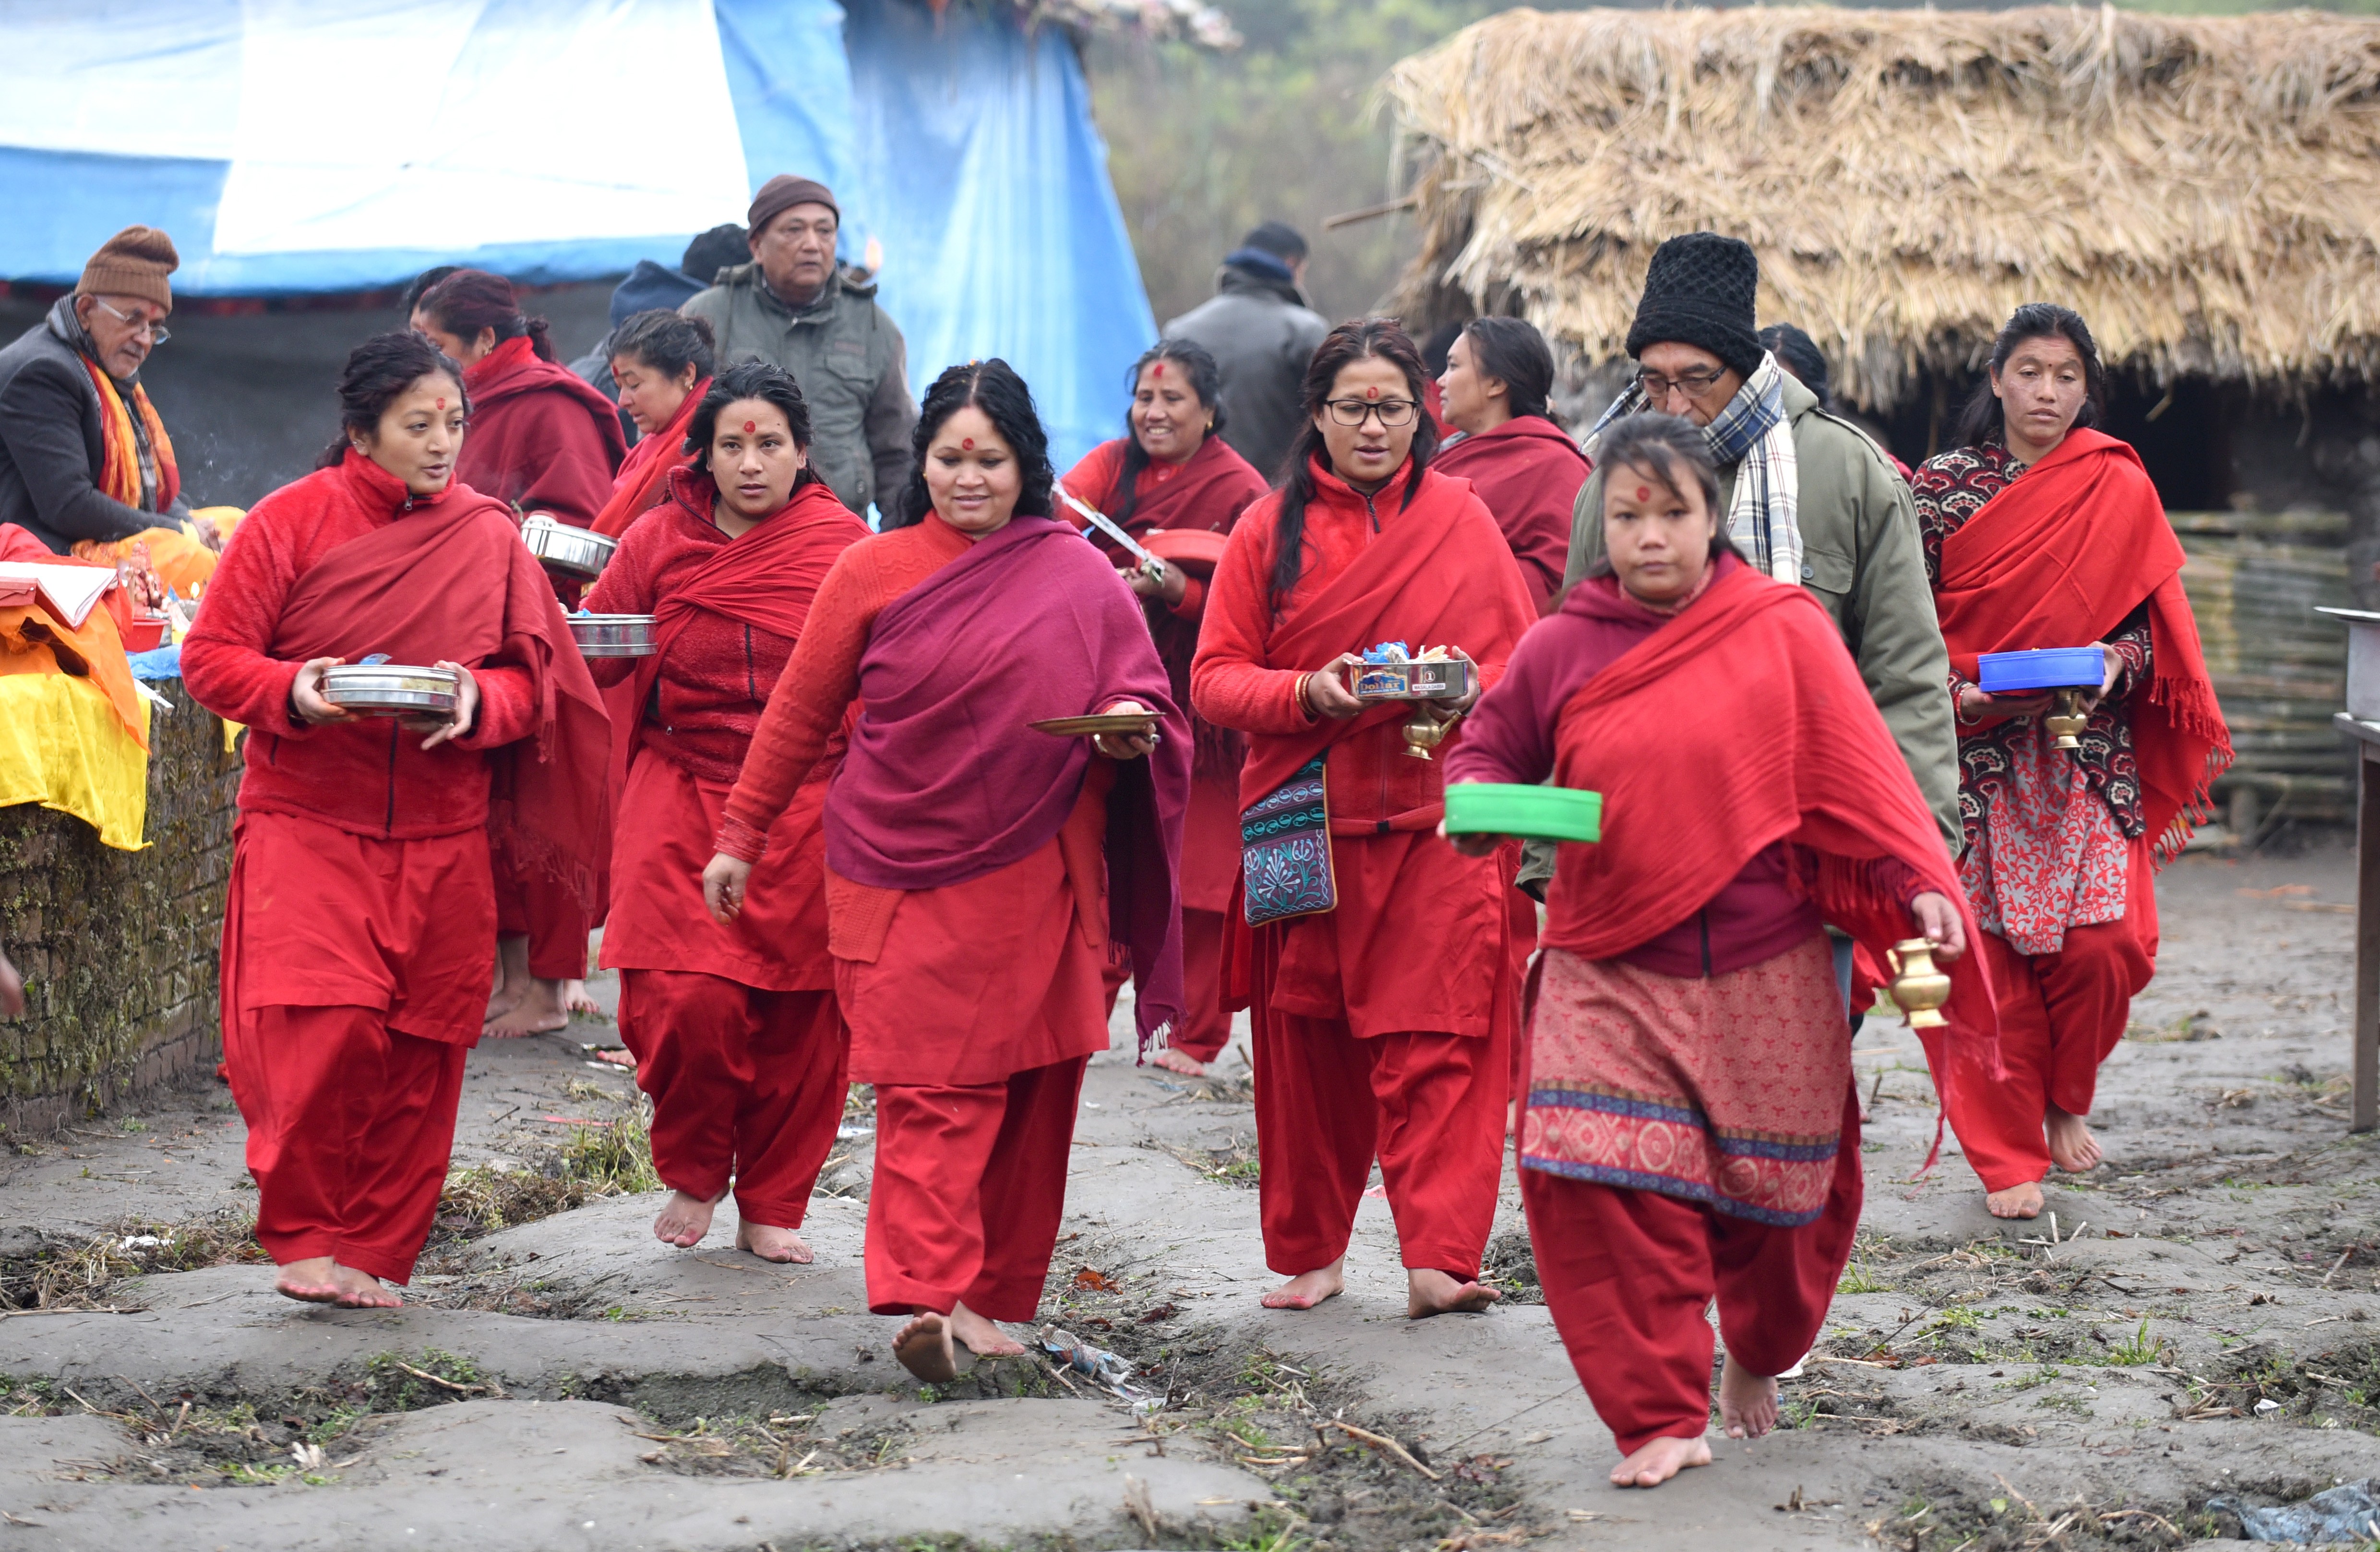 devotees-walk-barefoot-around-the-shrines-in-shankhu-on-the-first-day-of-month-long-swasthani-fasting-sankhu-kathmandu